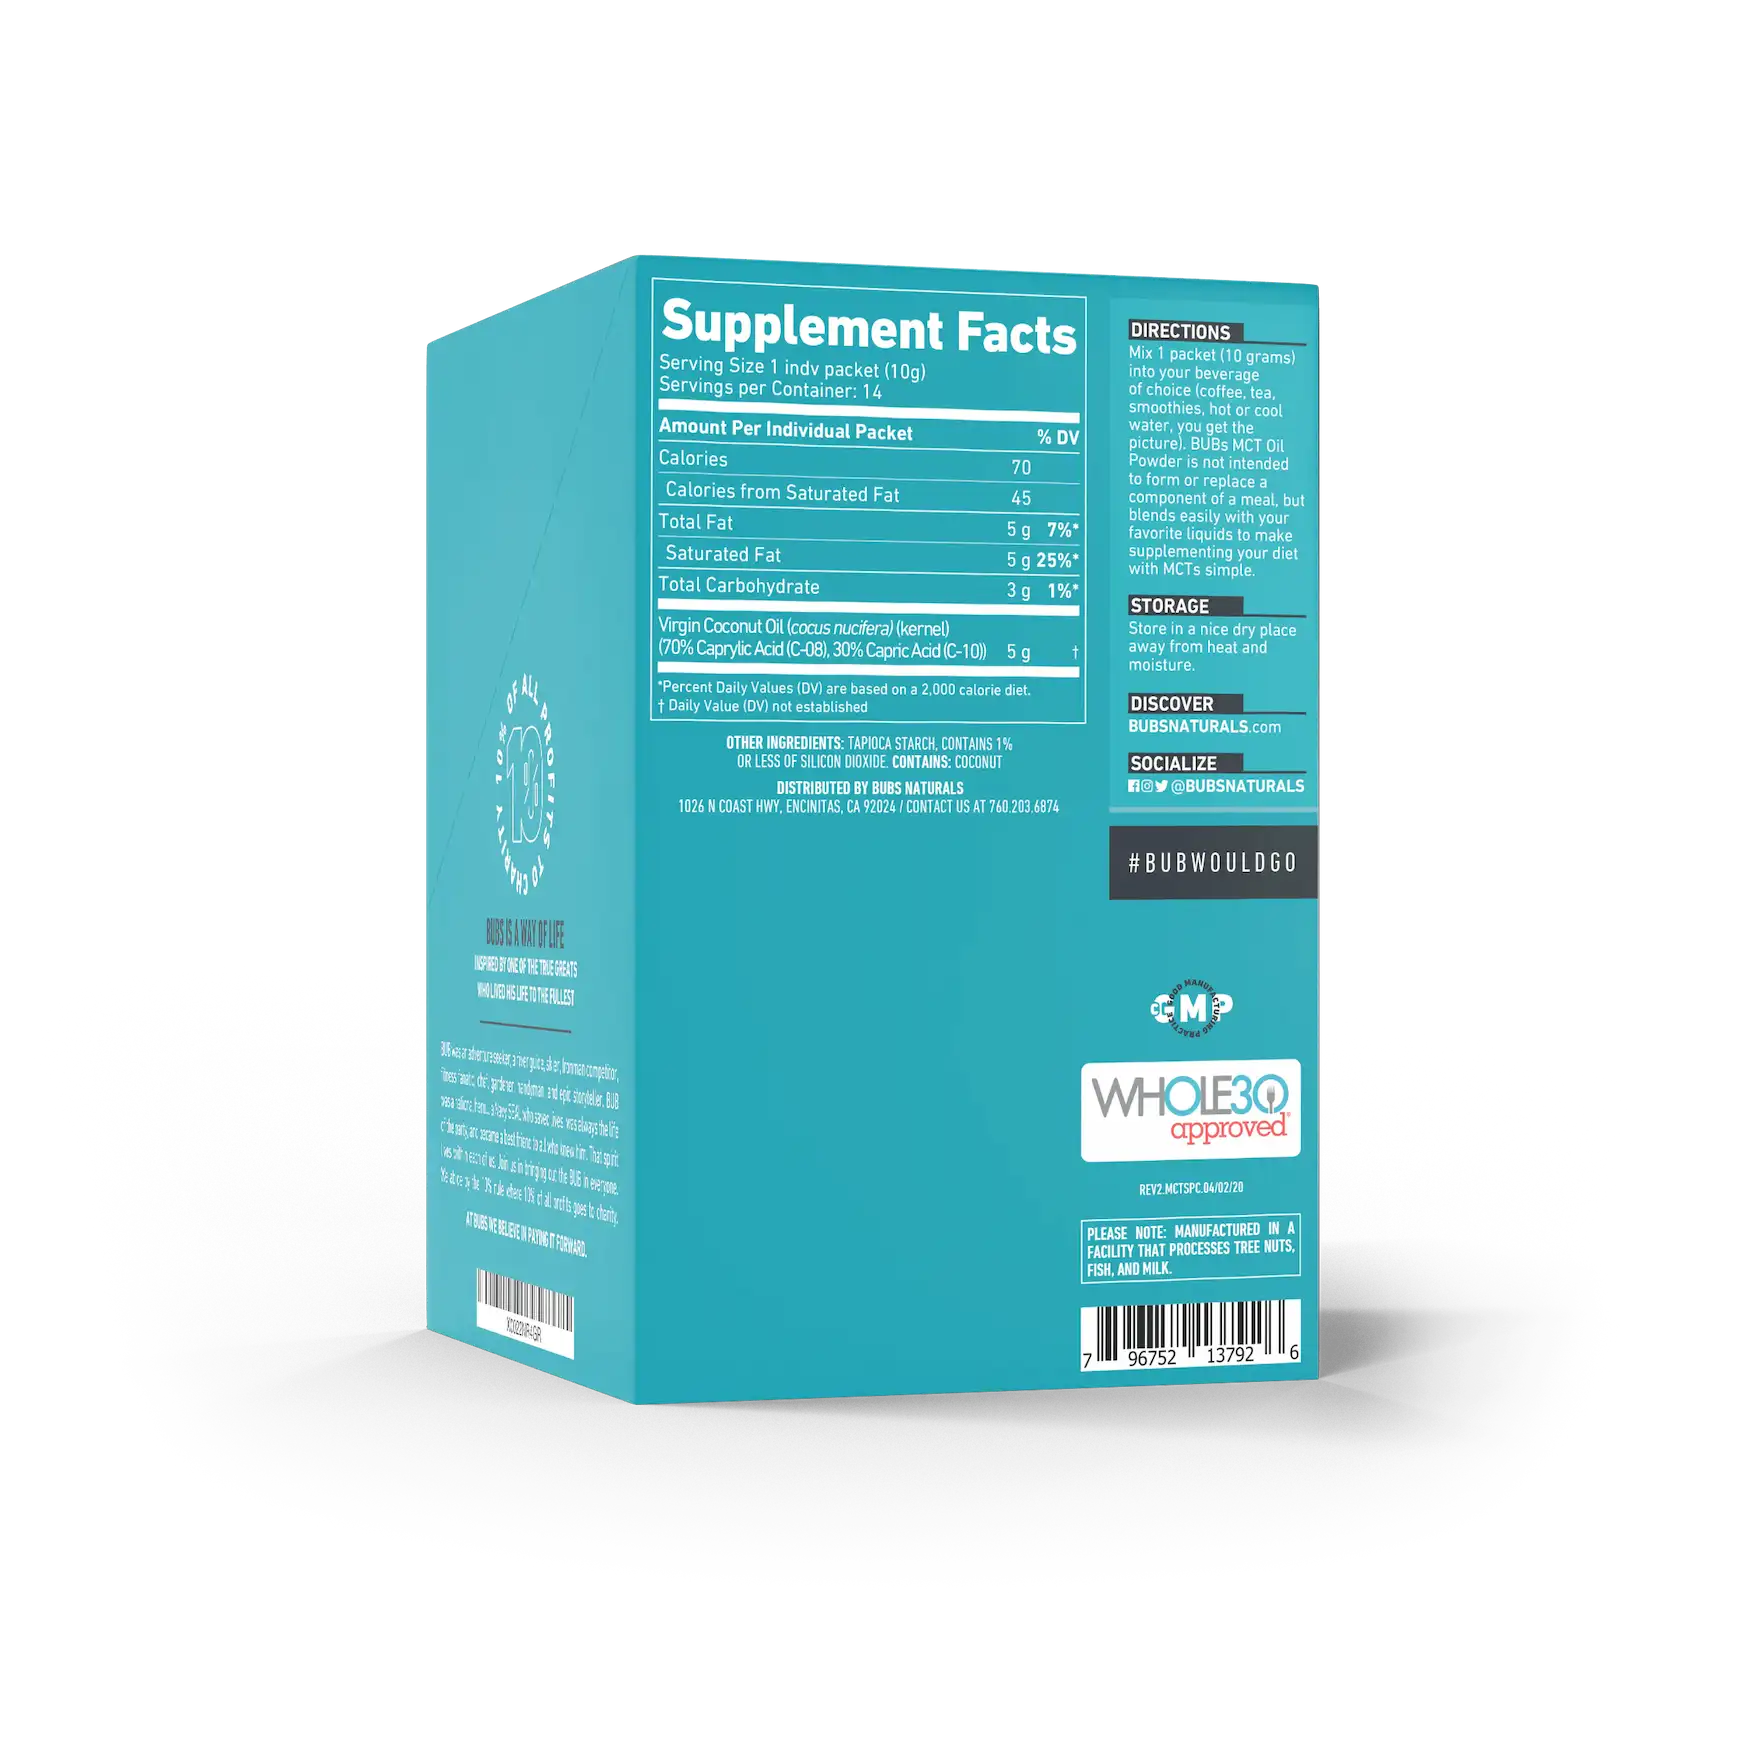 Bubs NATURALS: Fountain of Youth Powder, 10.16 oz